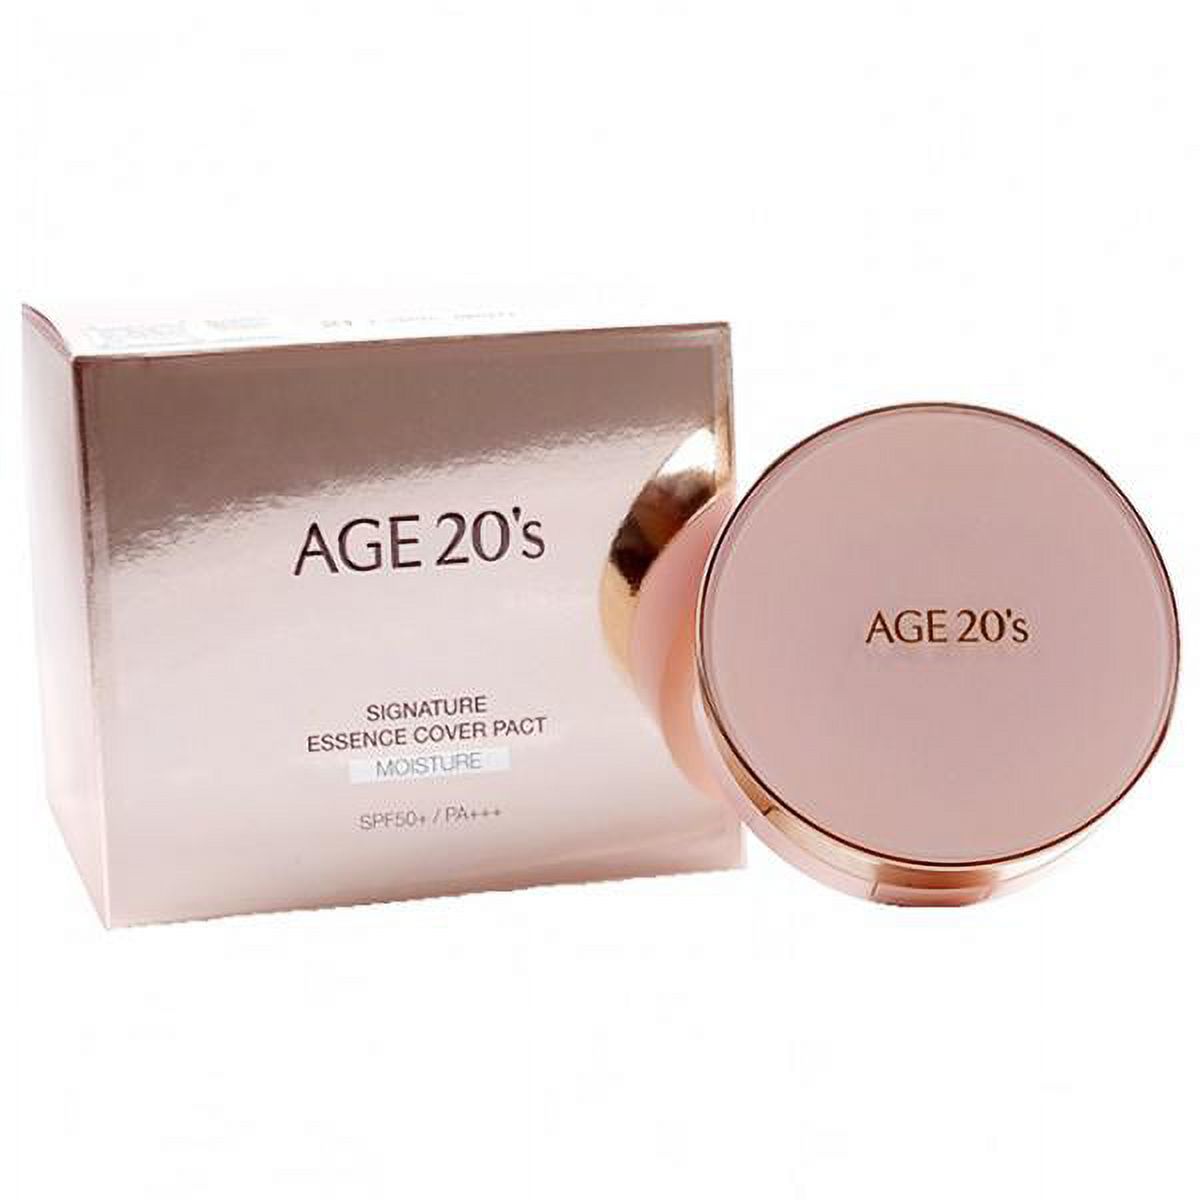 AGE 20'S Signature Essence Cover Pact Moisture, 21 Light Beige, SPF 50 - image 2 of 4